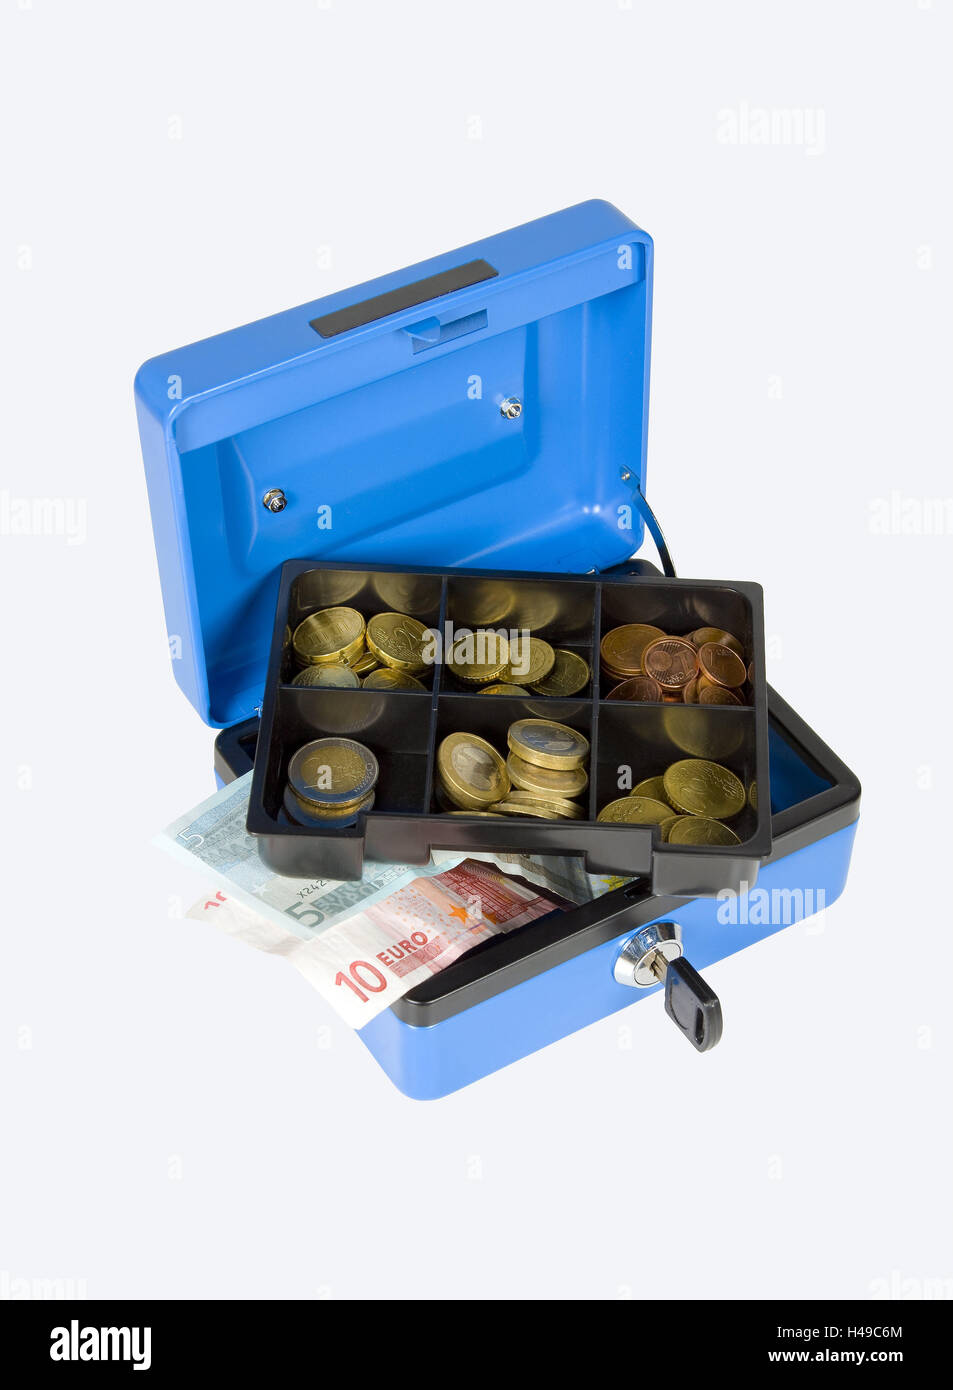 Cashbox, open, money, coins, money cassette, money, currency, euro, euro notes, euro notes, Euro coins, euro coins, sorted, filled, whole body, Finance save, savings, Key, knock-out, Stock Photo